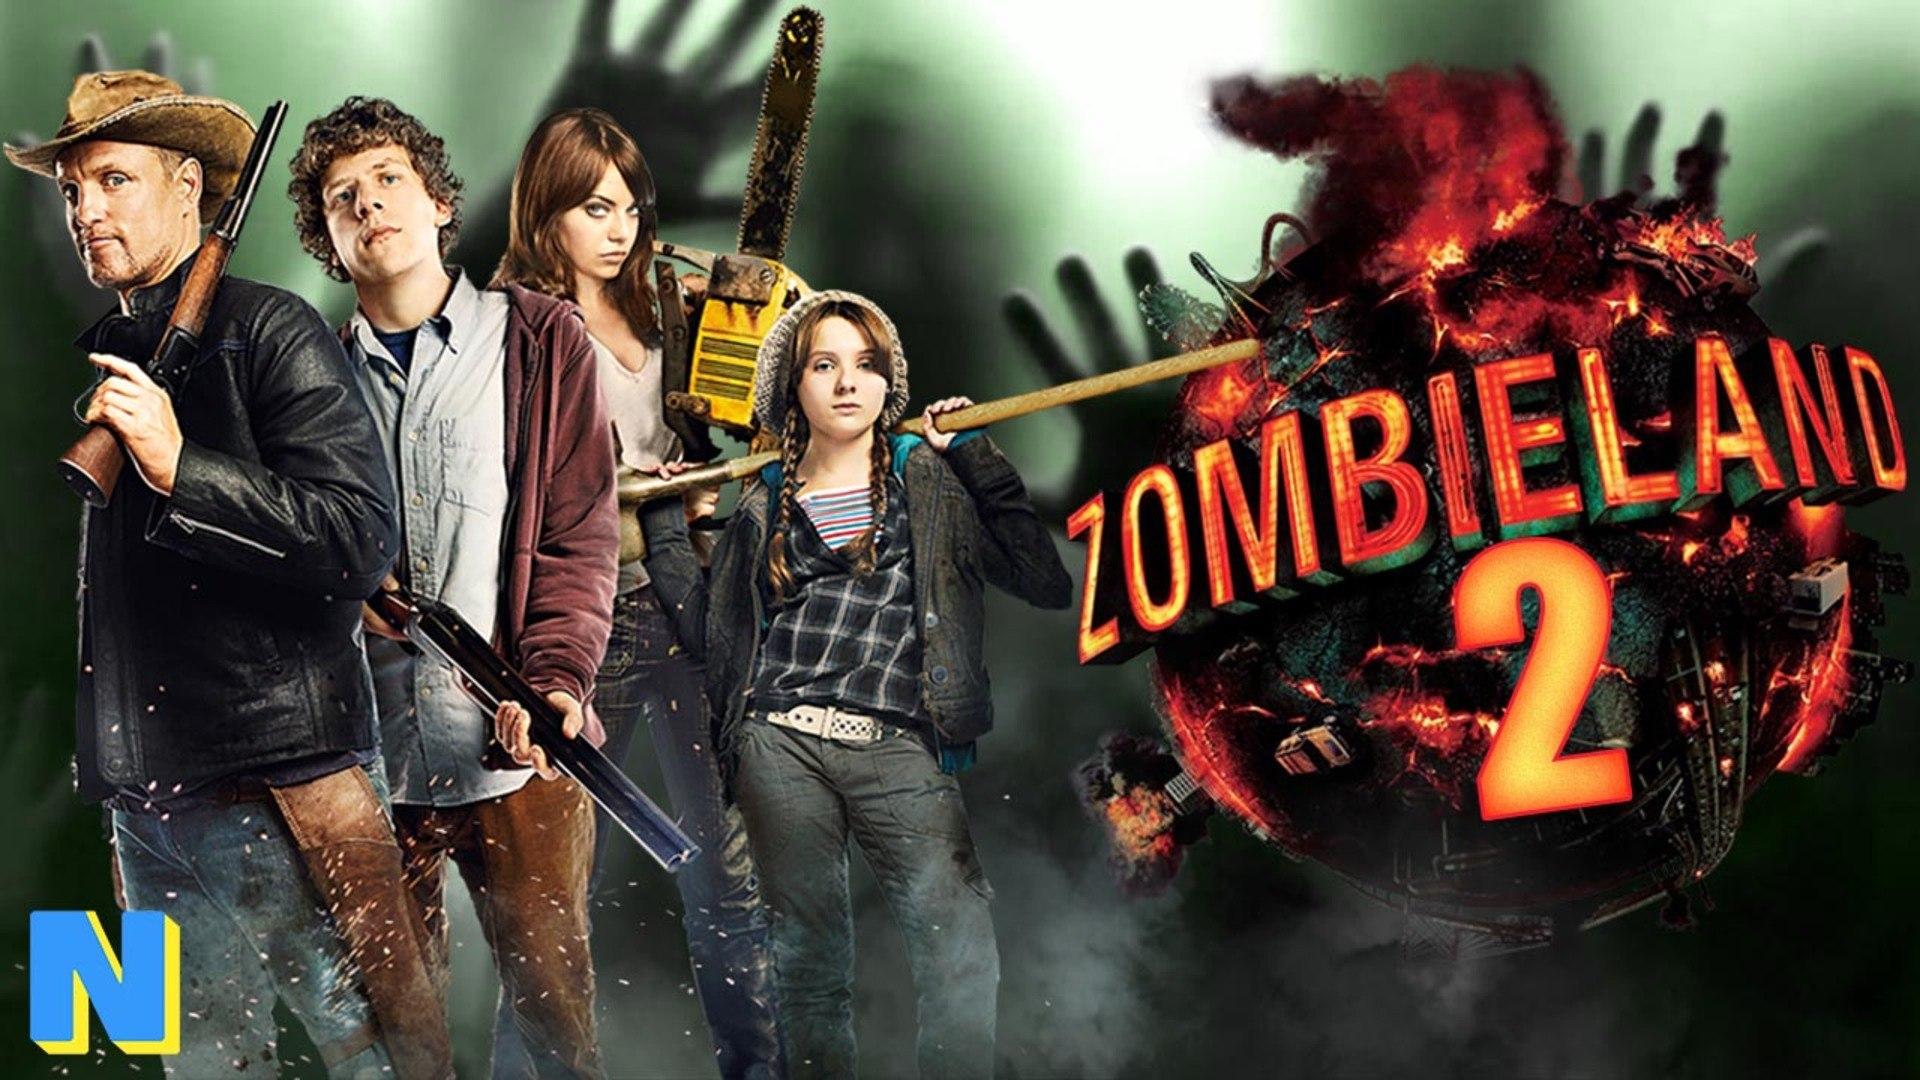 Zombieland 2 Aiming for 2019 Release